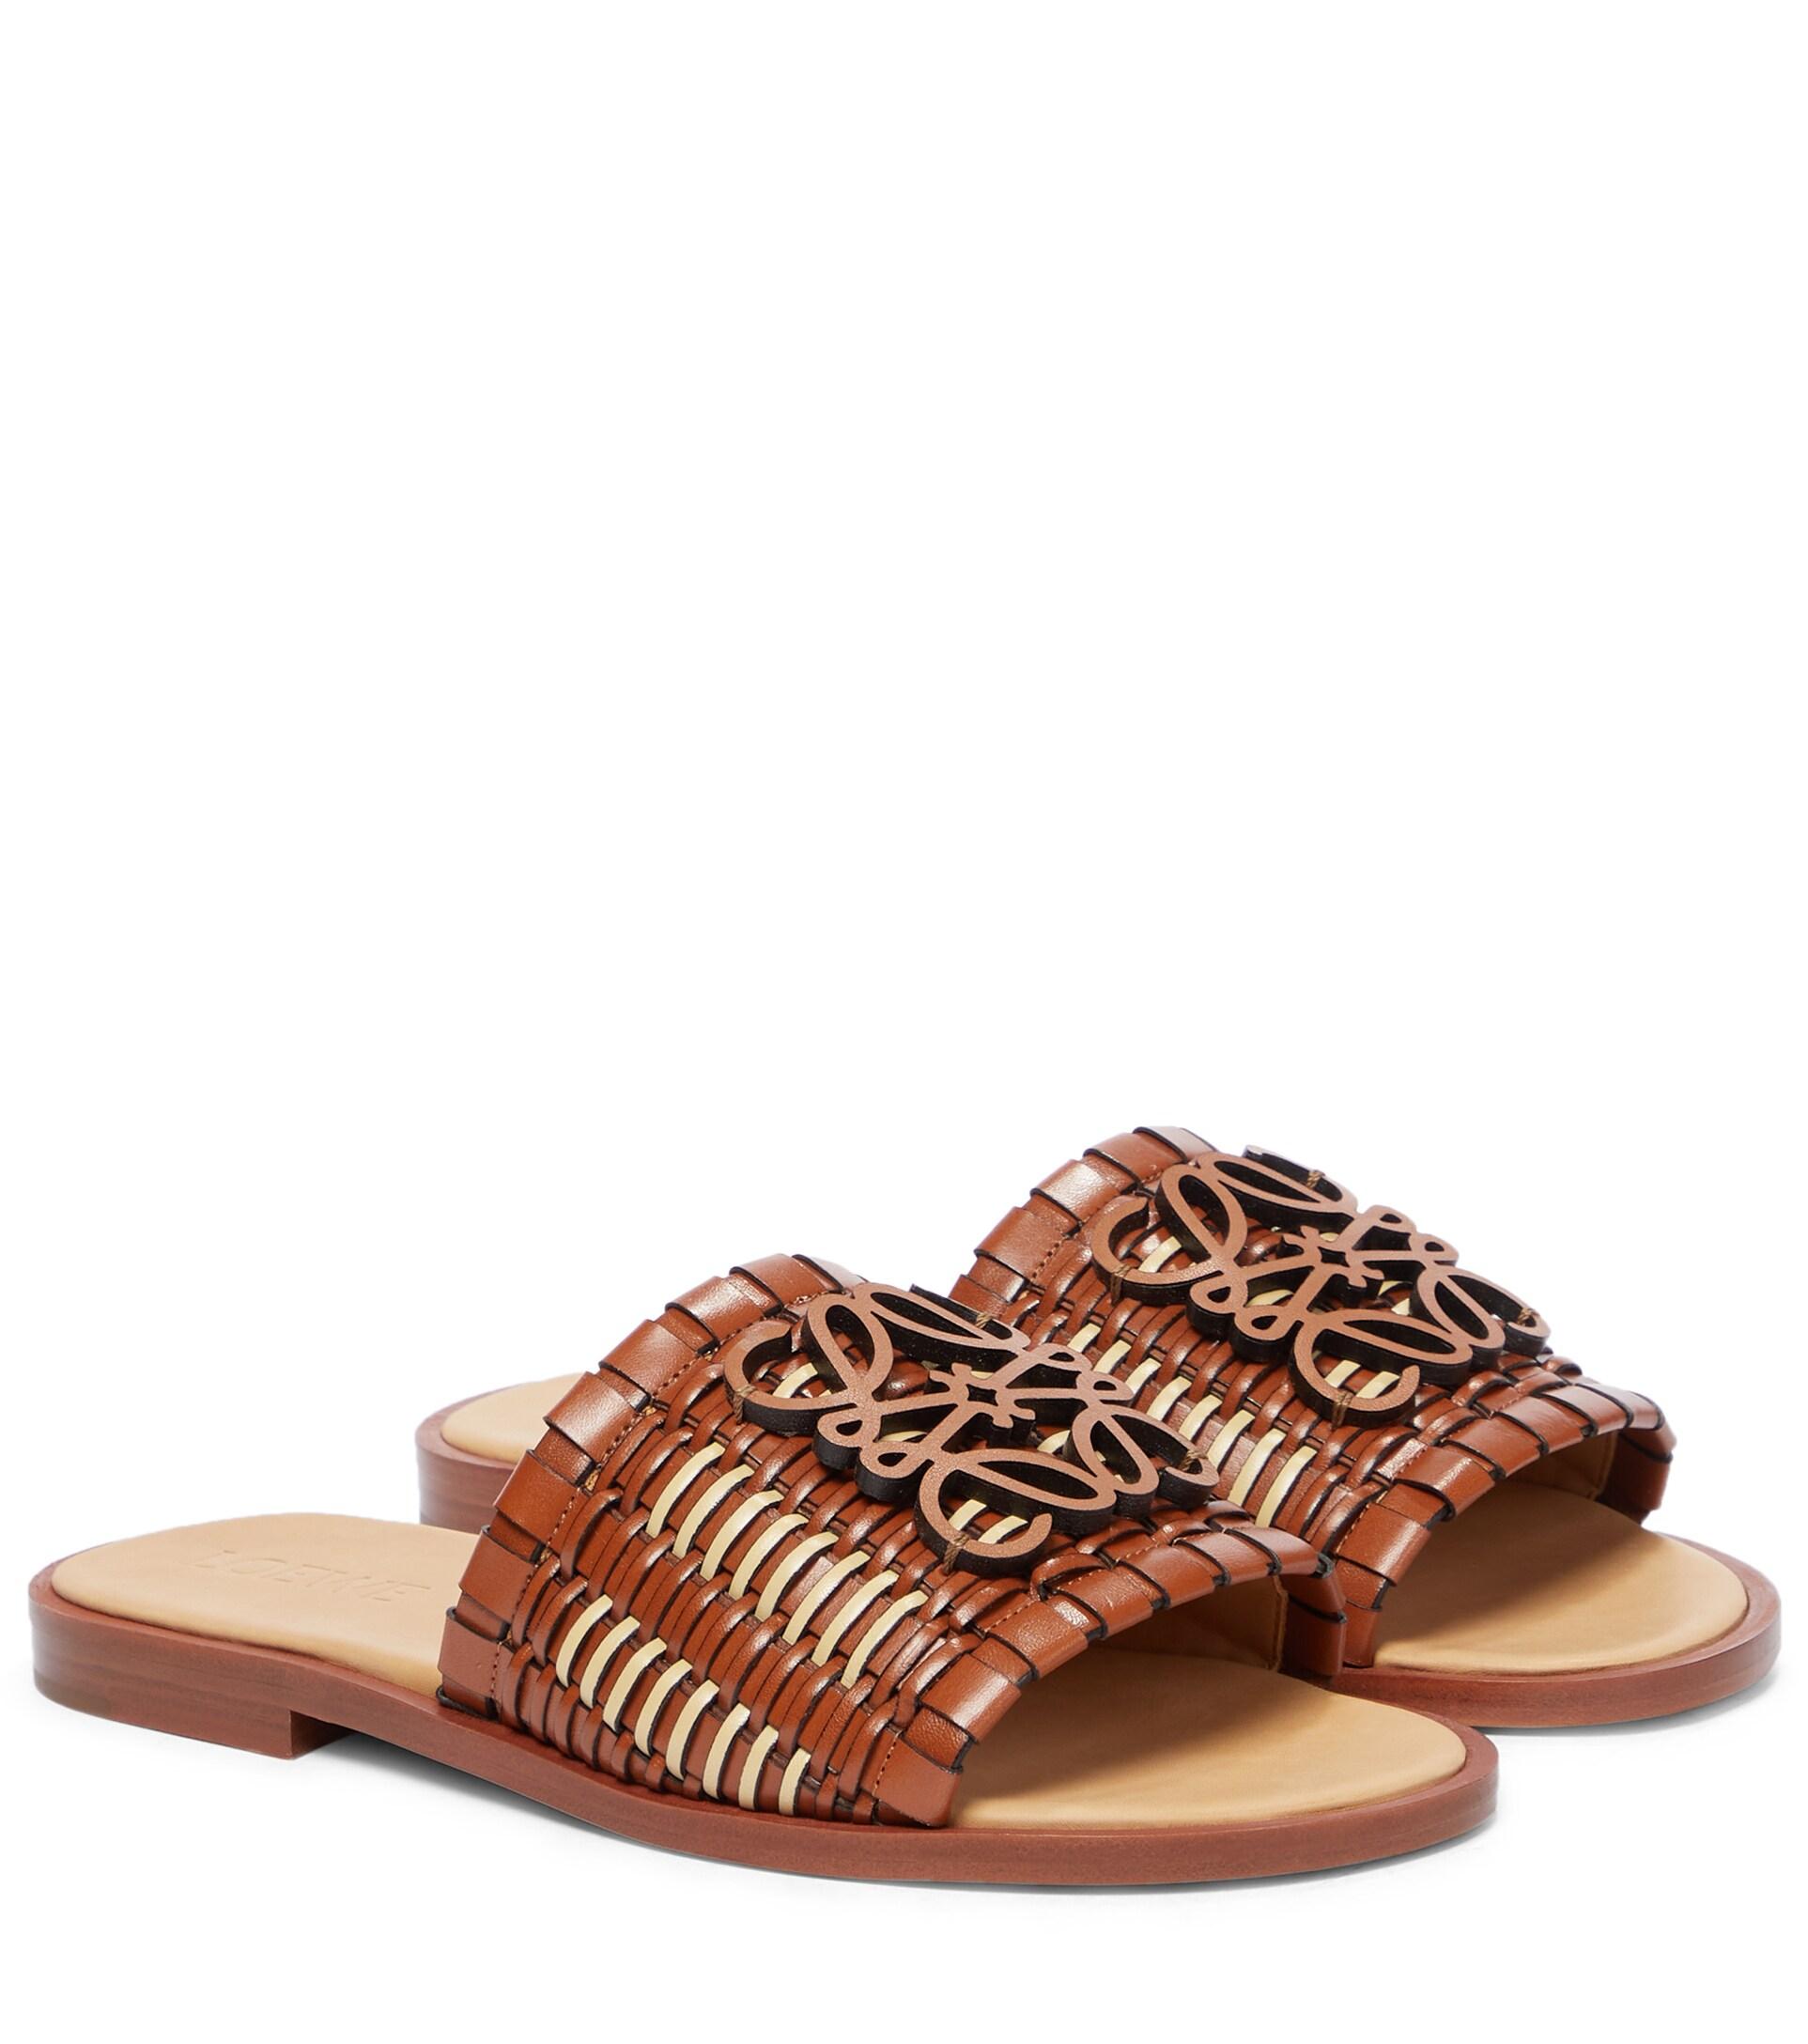 Loewe Anagram Woven Leather Slides in Tan Natural (Brown) | Lyst